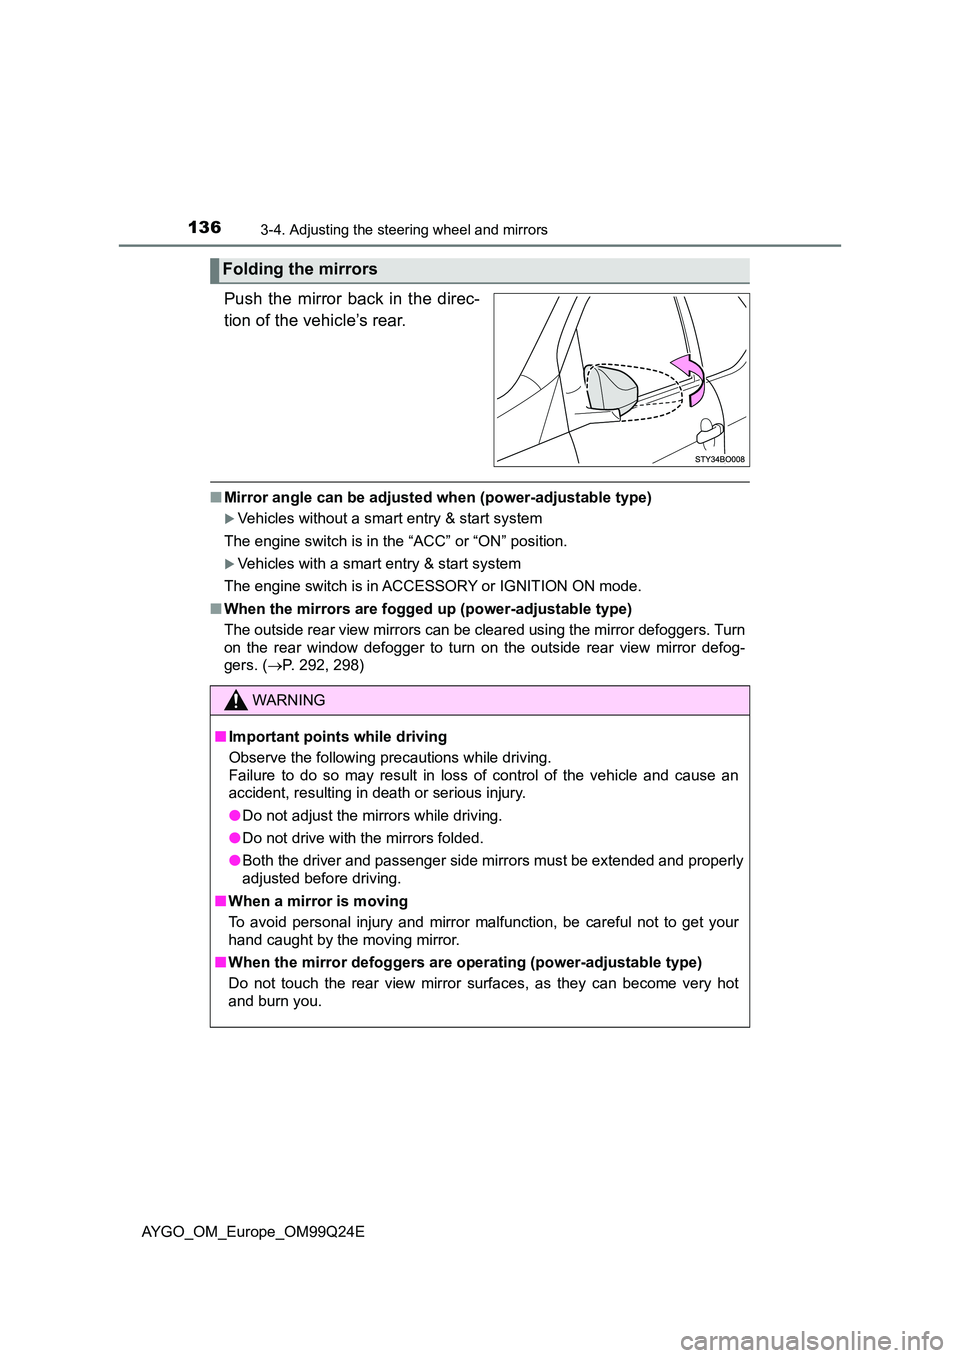 TOYOTA AYGO 2017  Owners Manual (in English) 1363-4. Adjusting the steering wheel and mirrors
AYGO_OM_Europe_OM99Q24E
Push the mirror back in the direc- 
tion of the vehicle’s rear. 
■ Mirror angle can be adjusted when (power-adjustable type